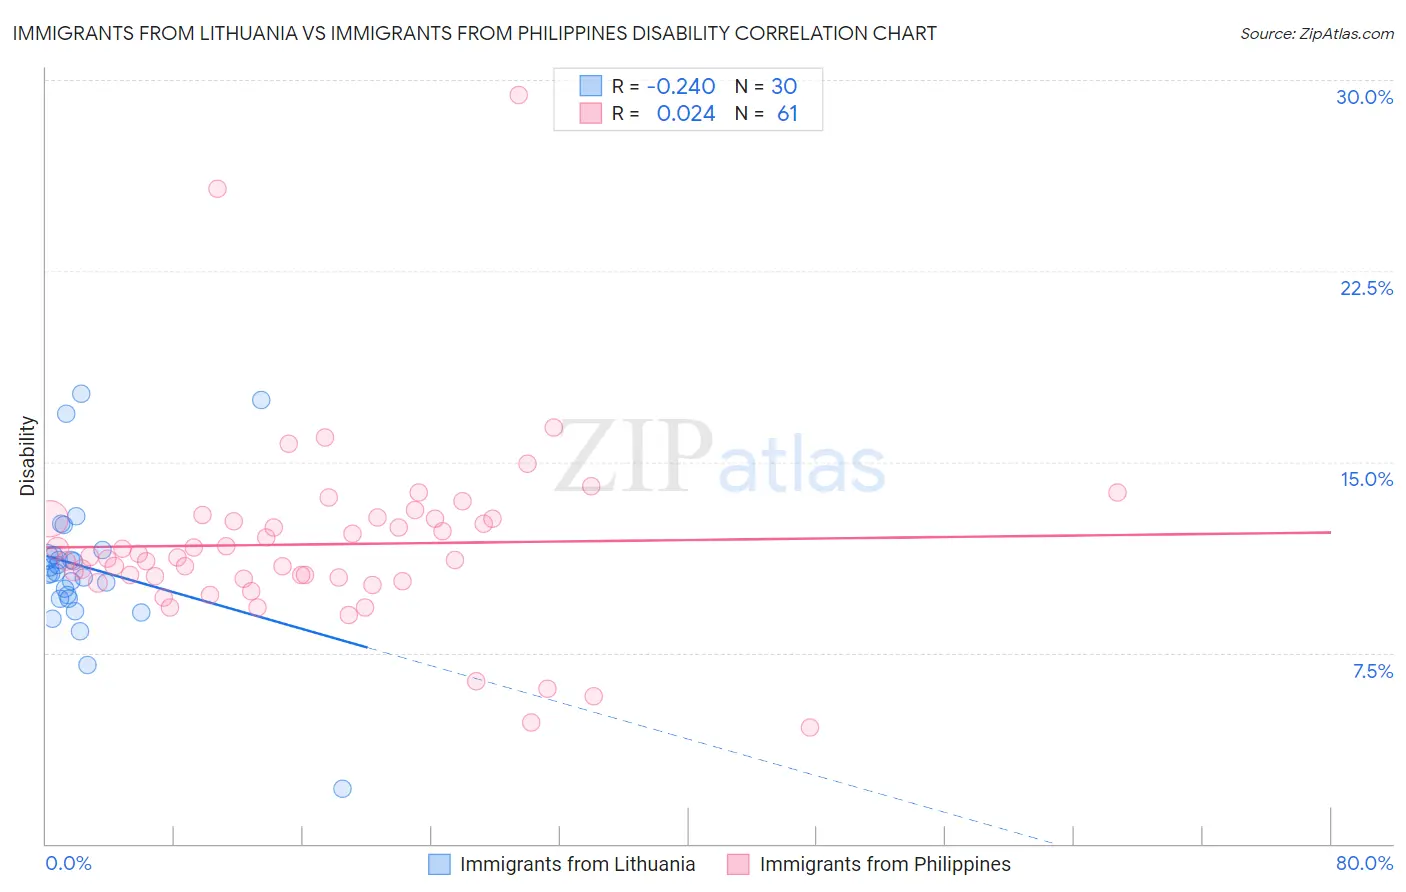 Immigrants from Lithuania vs Immigrants from Philippines Disability